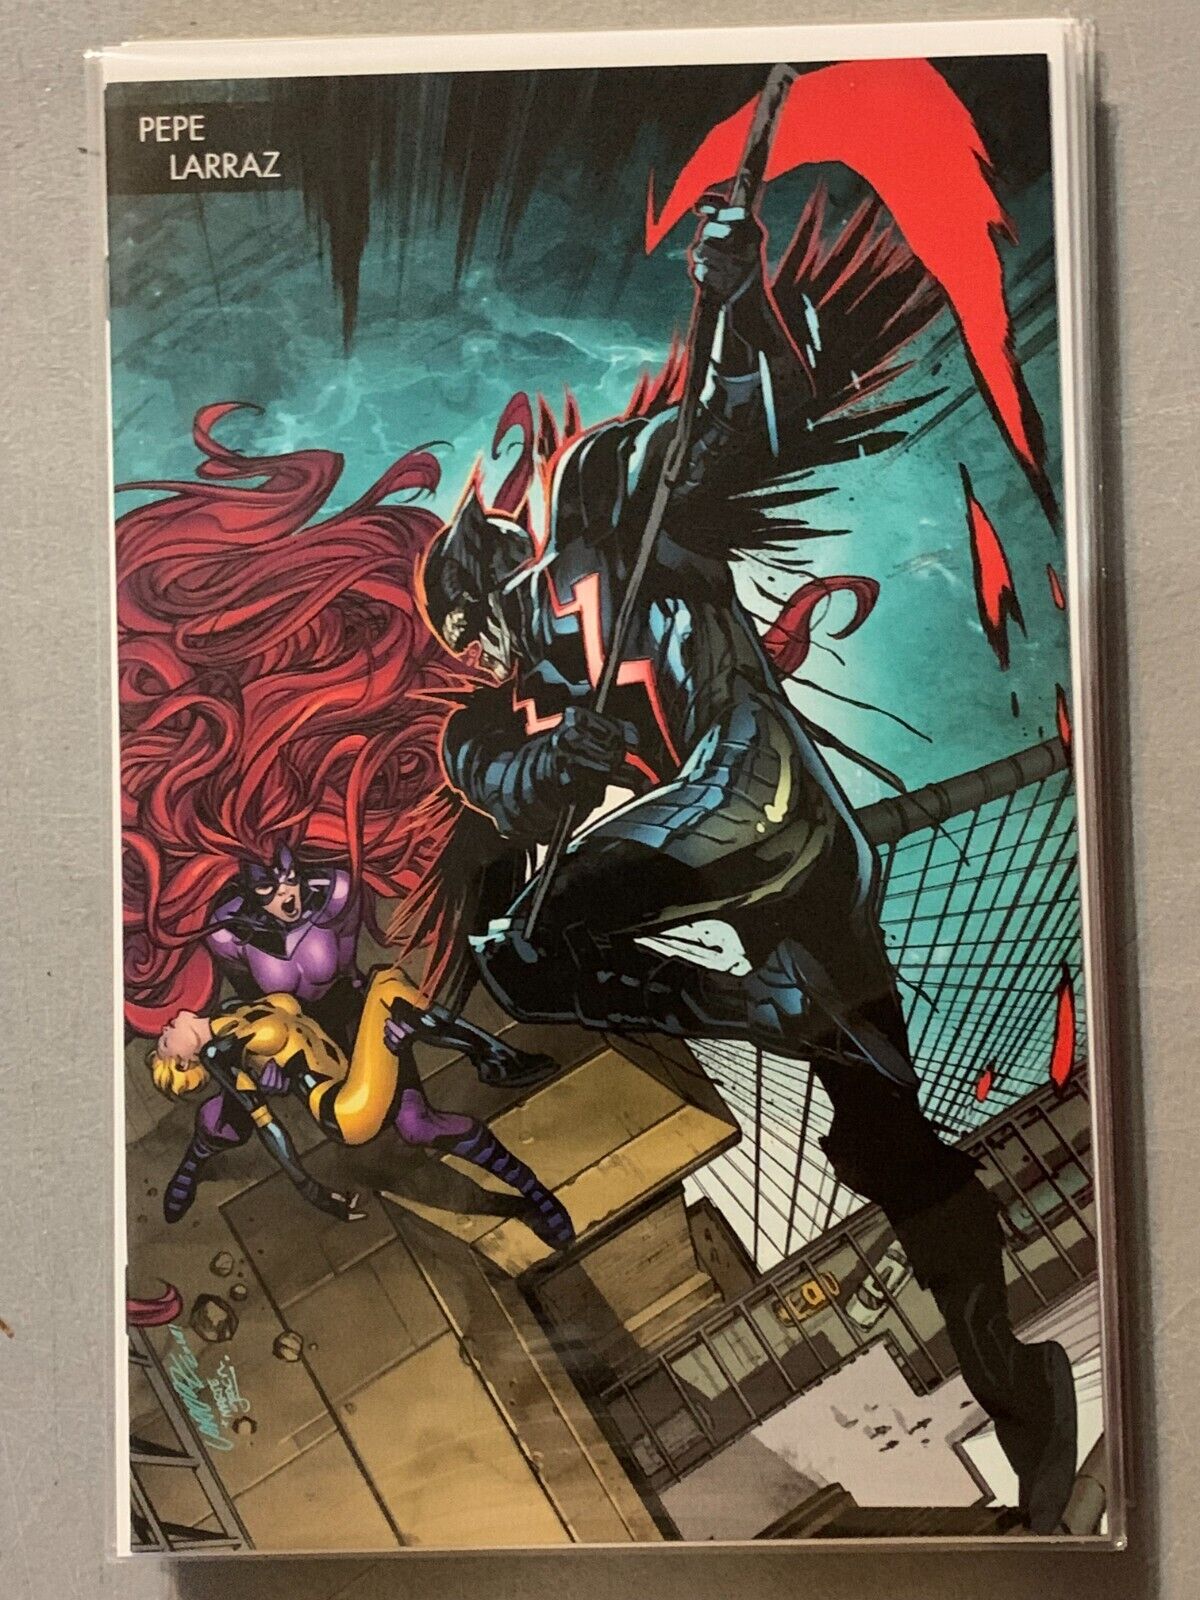 DEATH OF THE INHUMANS #4 NM LARRAZ YOUNG GUNS VARIANT - MARVEL 2018